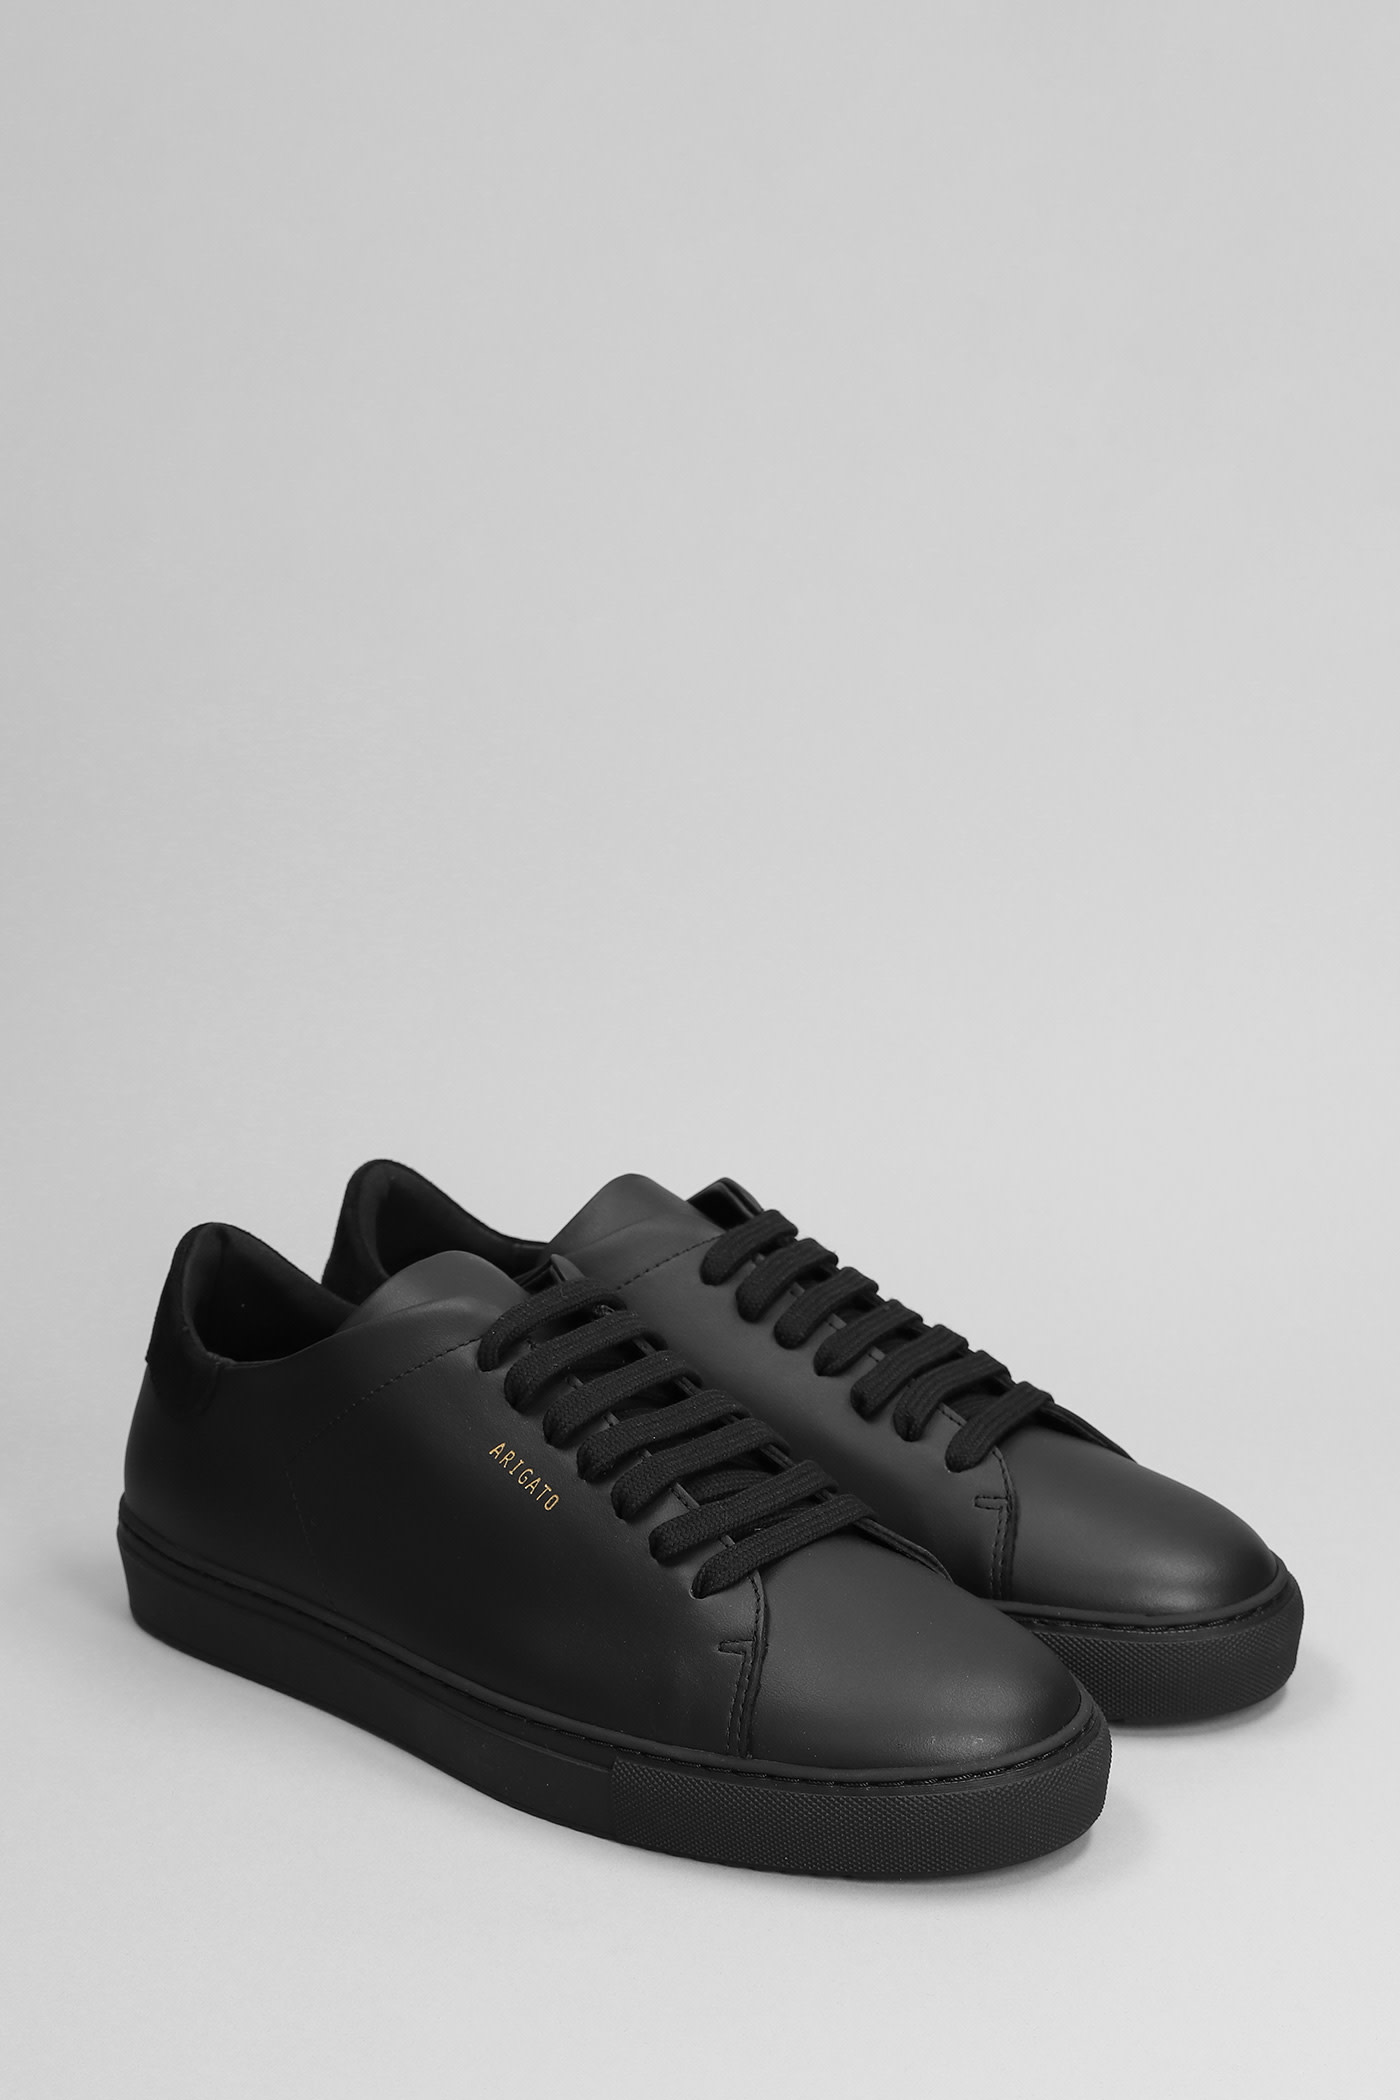 Shop Axel Arigato Clean 90 Sneakers In Black Suede And Leather